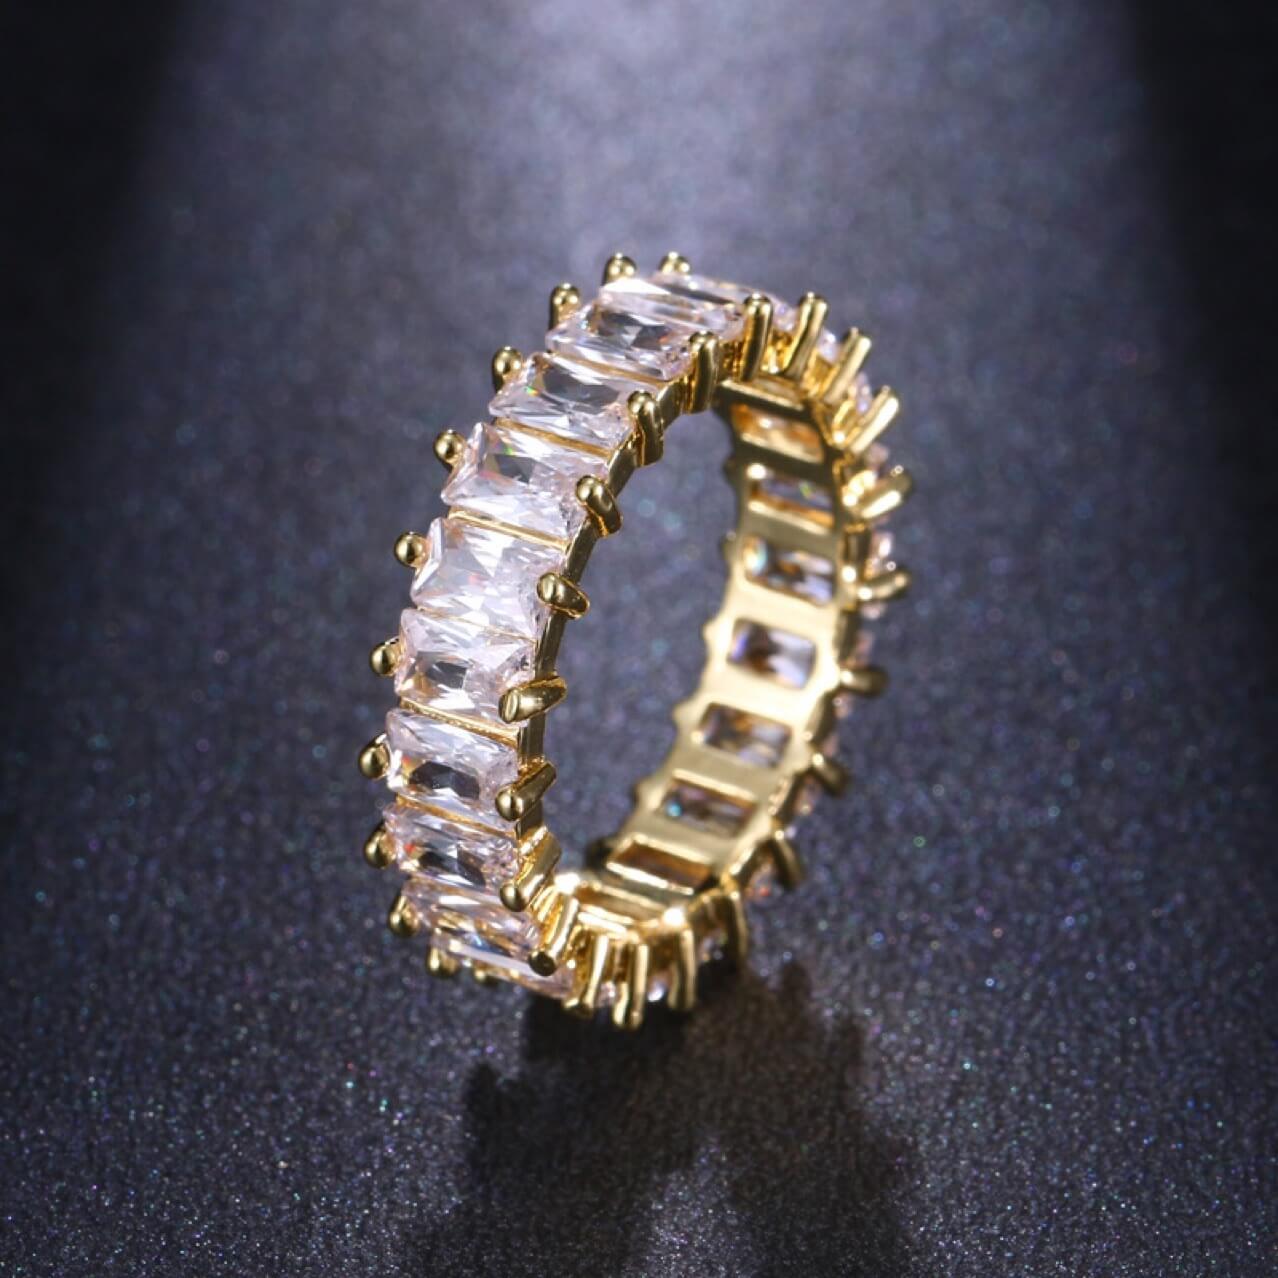 5mm Emerald Cut Inlaid White Square Zircon Gold Plated Ring-silviax